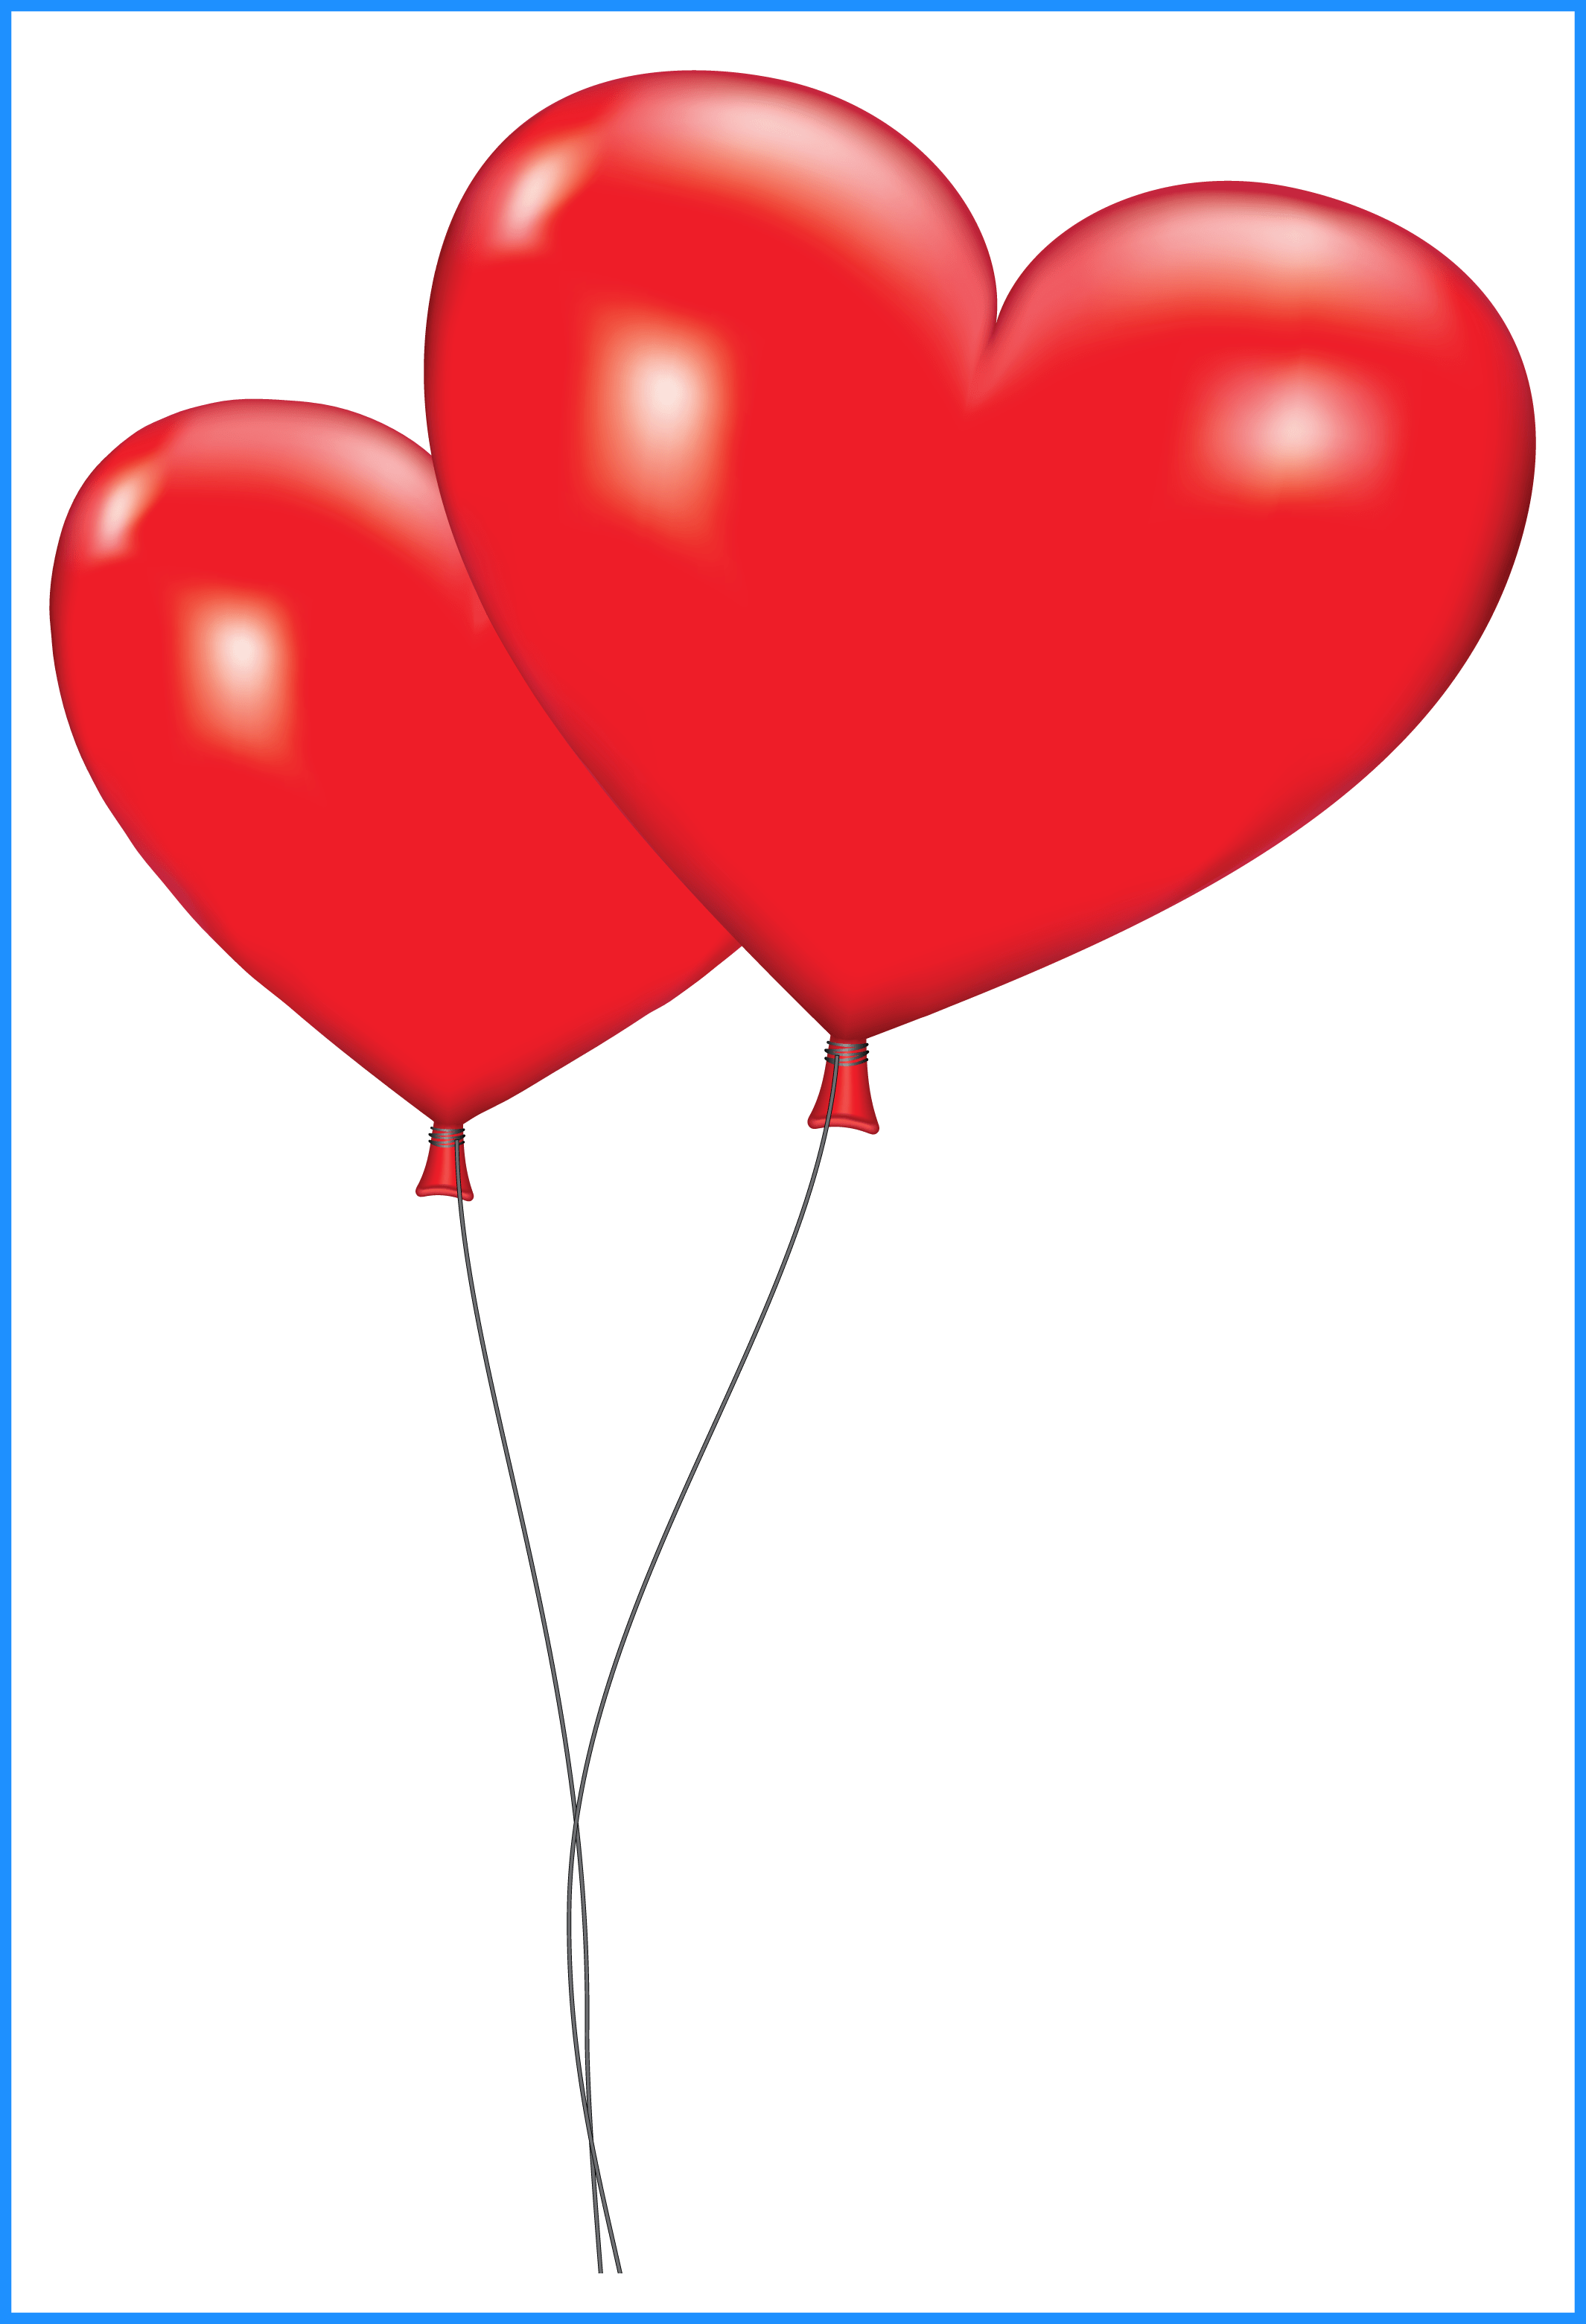 Bouquet Png Balloon Bouquet Png The Best Orange Balloon - Heart Shaped Balloons Png (2130x3121)